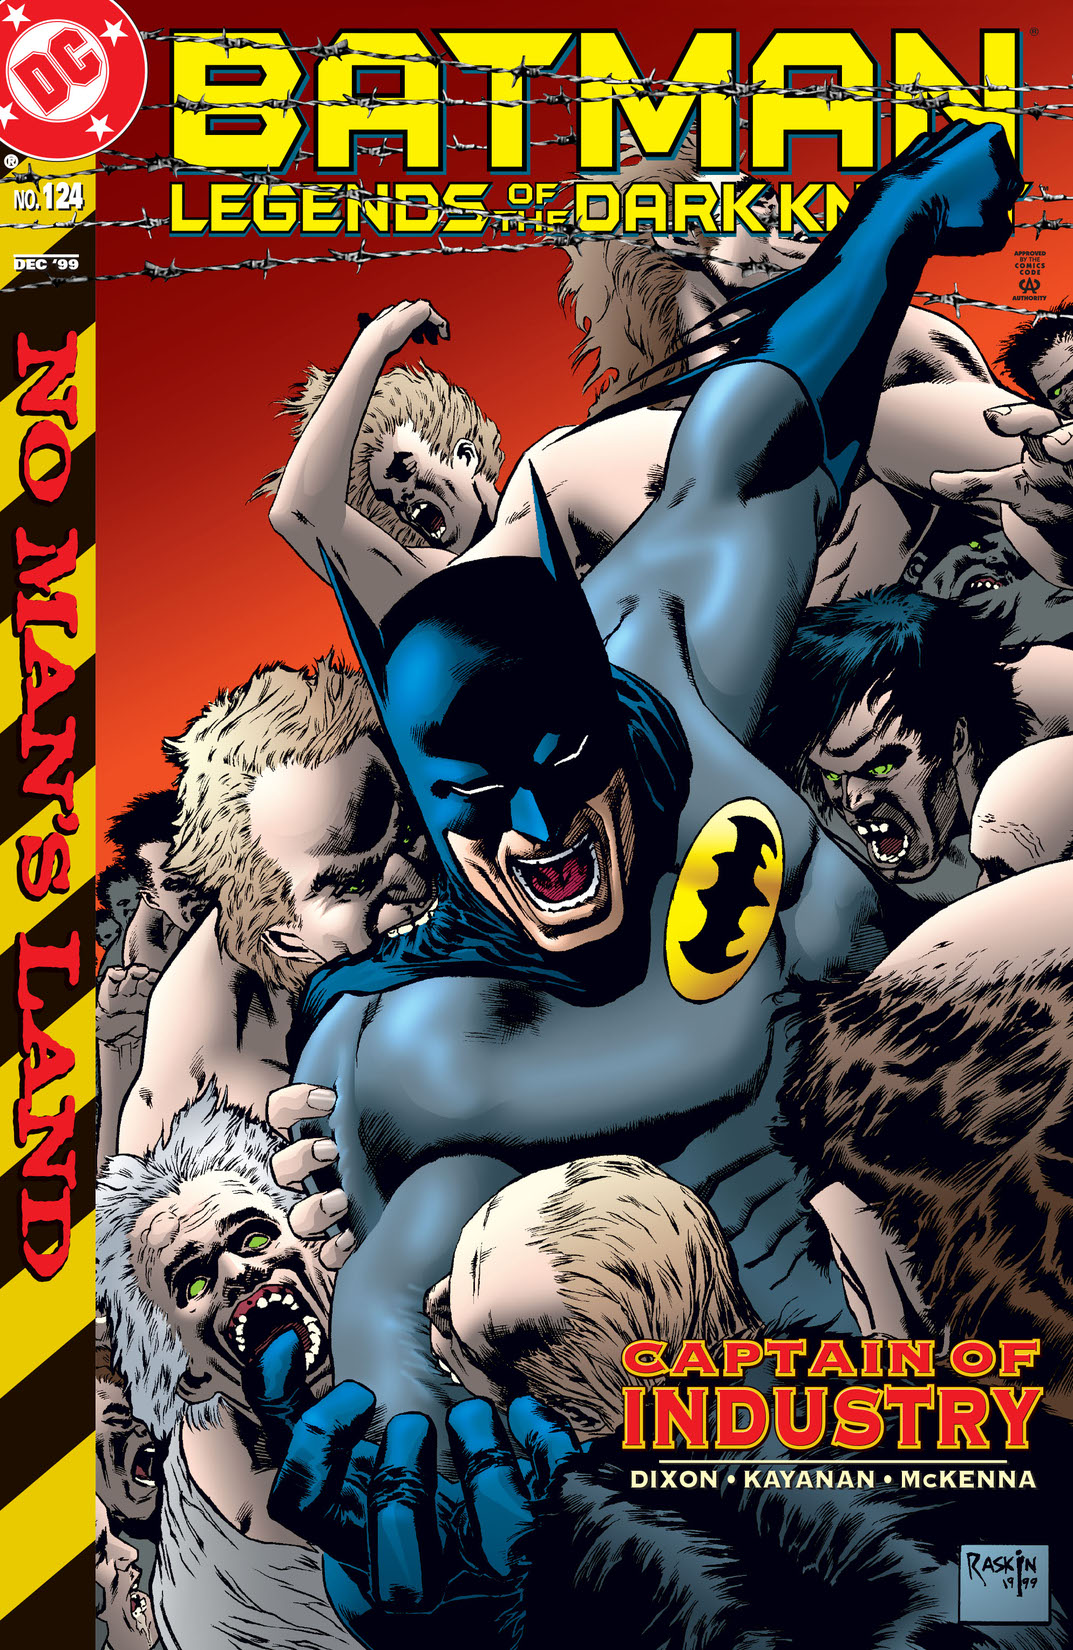 Batman: Legends of the Dark Knight #124 preview images